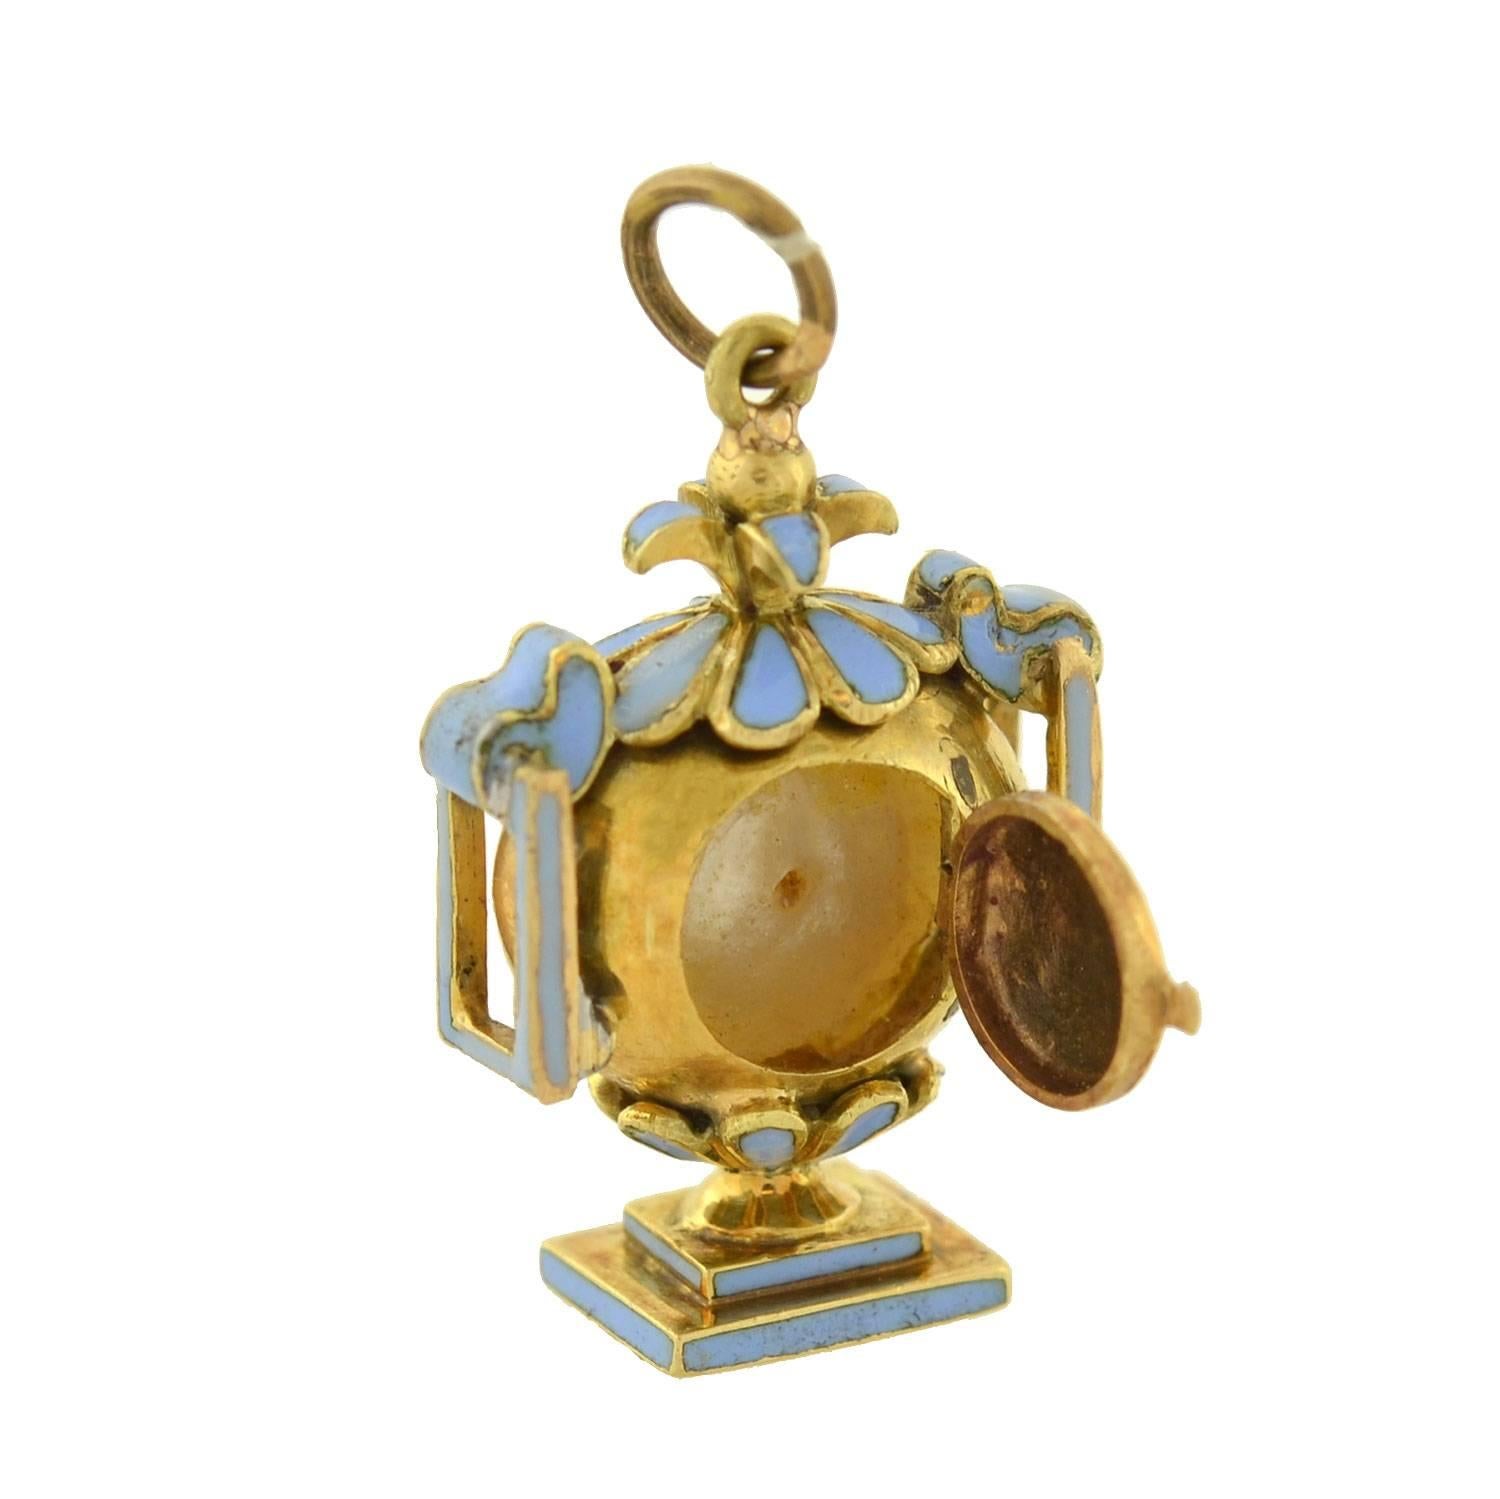 This rare memorial urn pendant from the Victorian era (ca1880) is quite an unusual piece! Crafted in 18kt gold, the pendant is richly detailed, and serves as a fine example of the mourning jewelry tradition. A natural white pearl portrays the